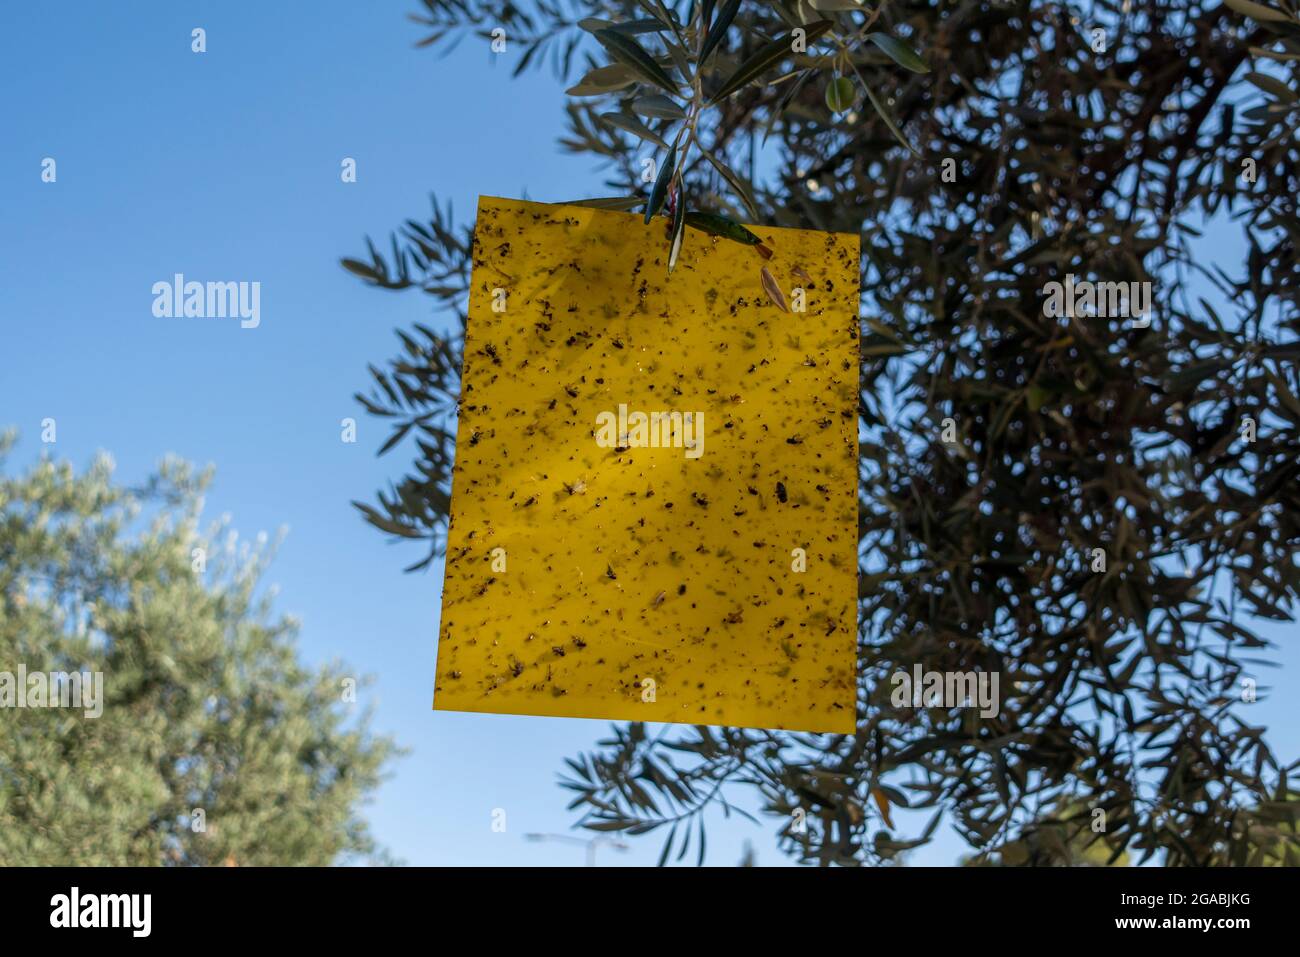 https://c8.alamy.com/comp/2GABJKG/flies-and-other-insects-caught-on-sticky-fly-paper-trap-hanged-in-an-olive-tree-in-east-jerusalem-israelor-2GABJKG.jpg